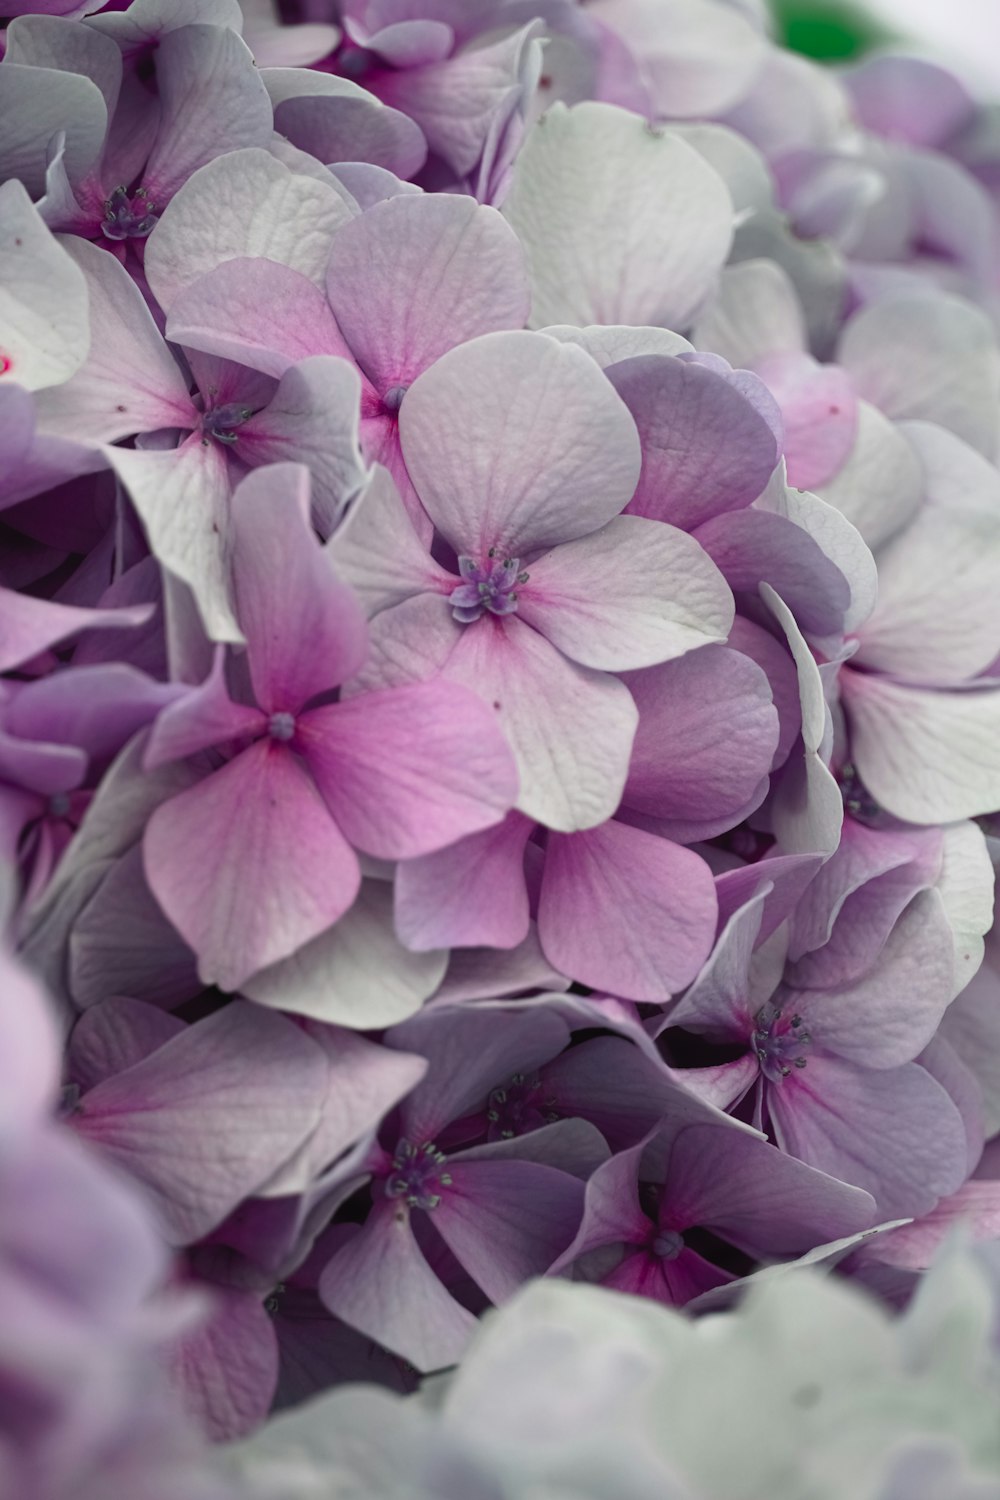 pink and white flower petals